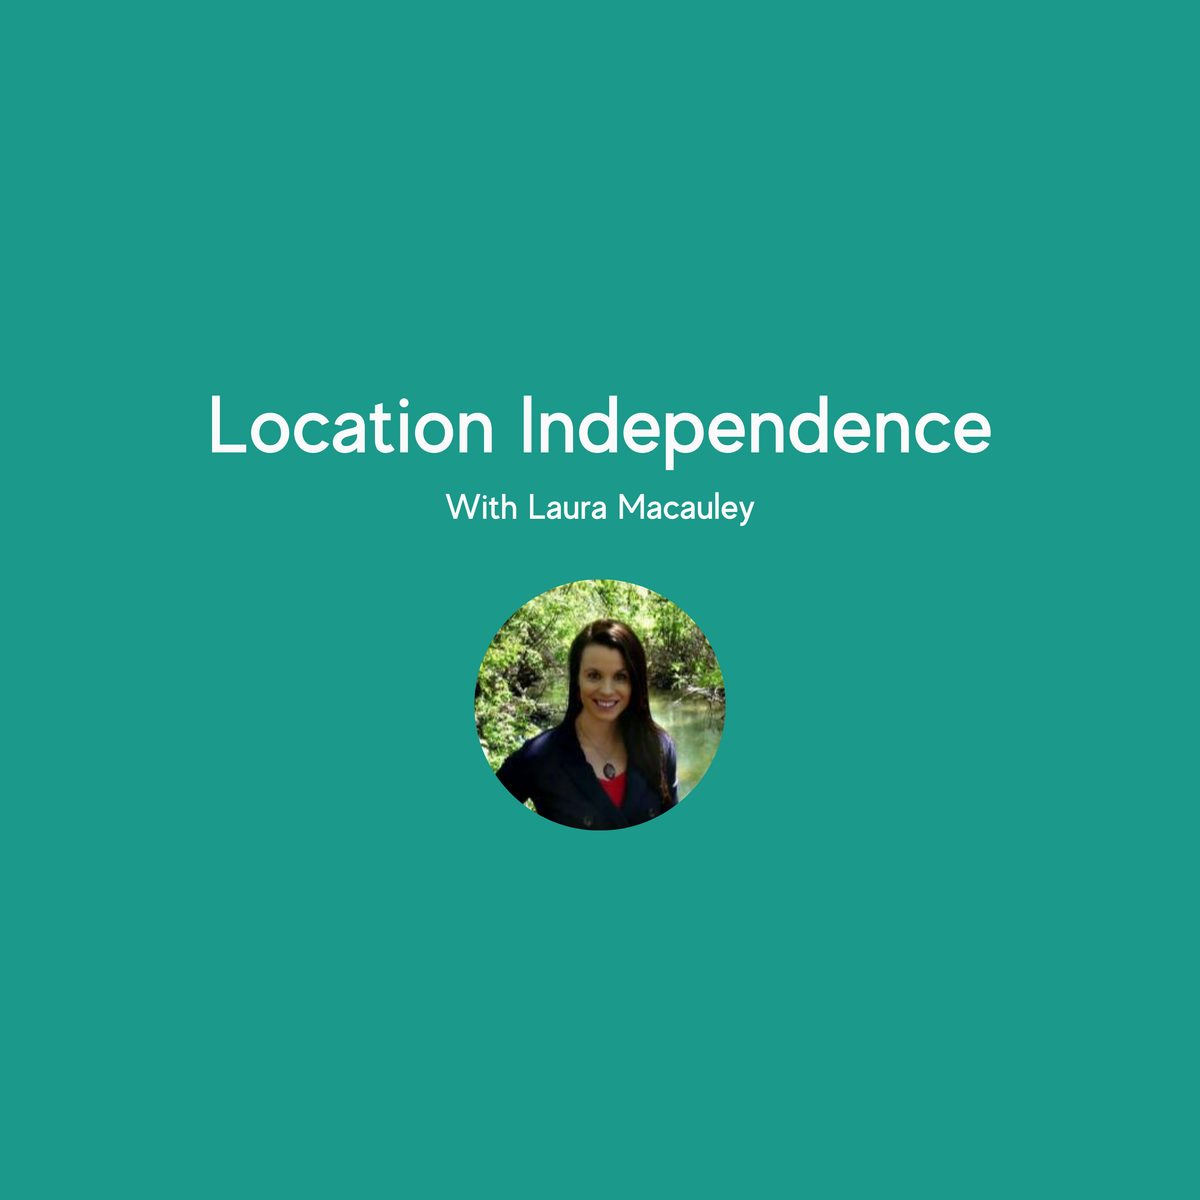 Location Independence with Laura Macauley